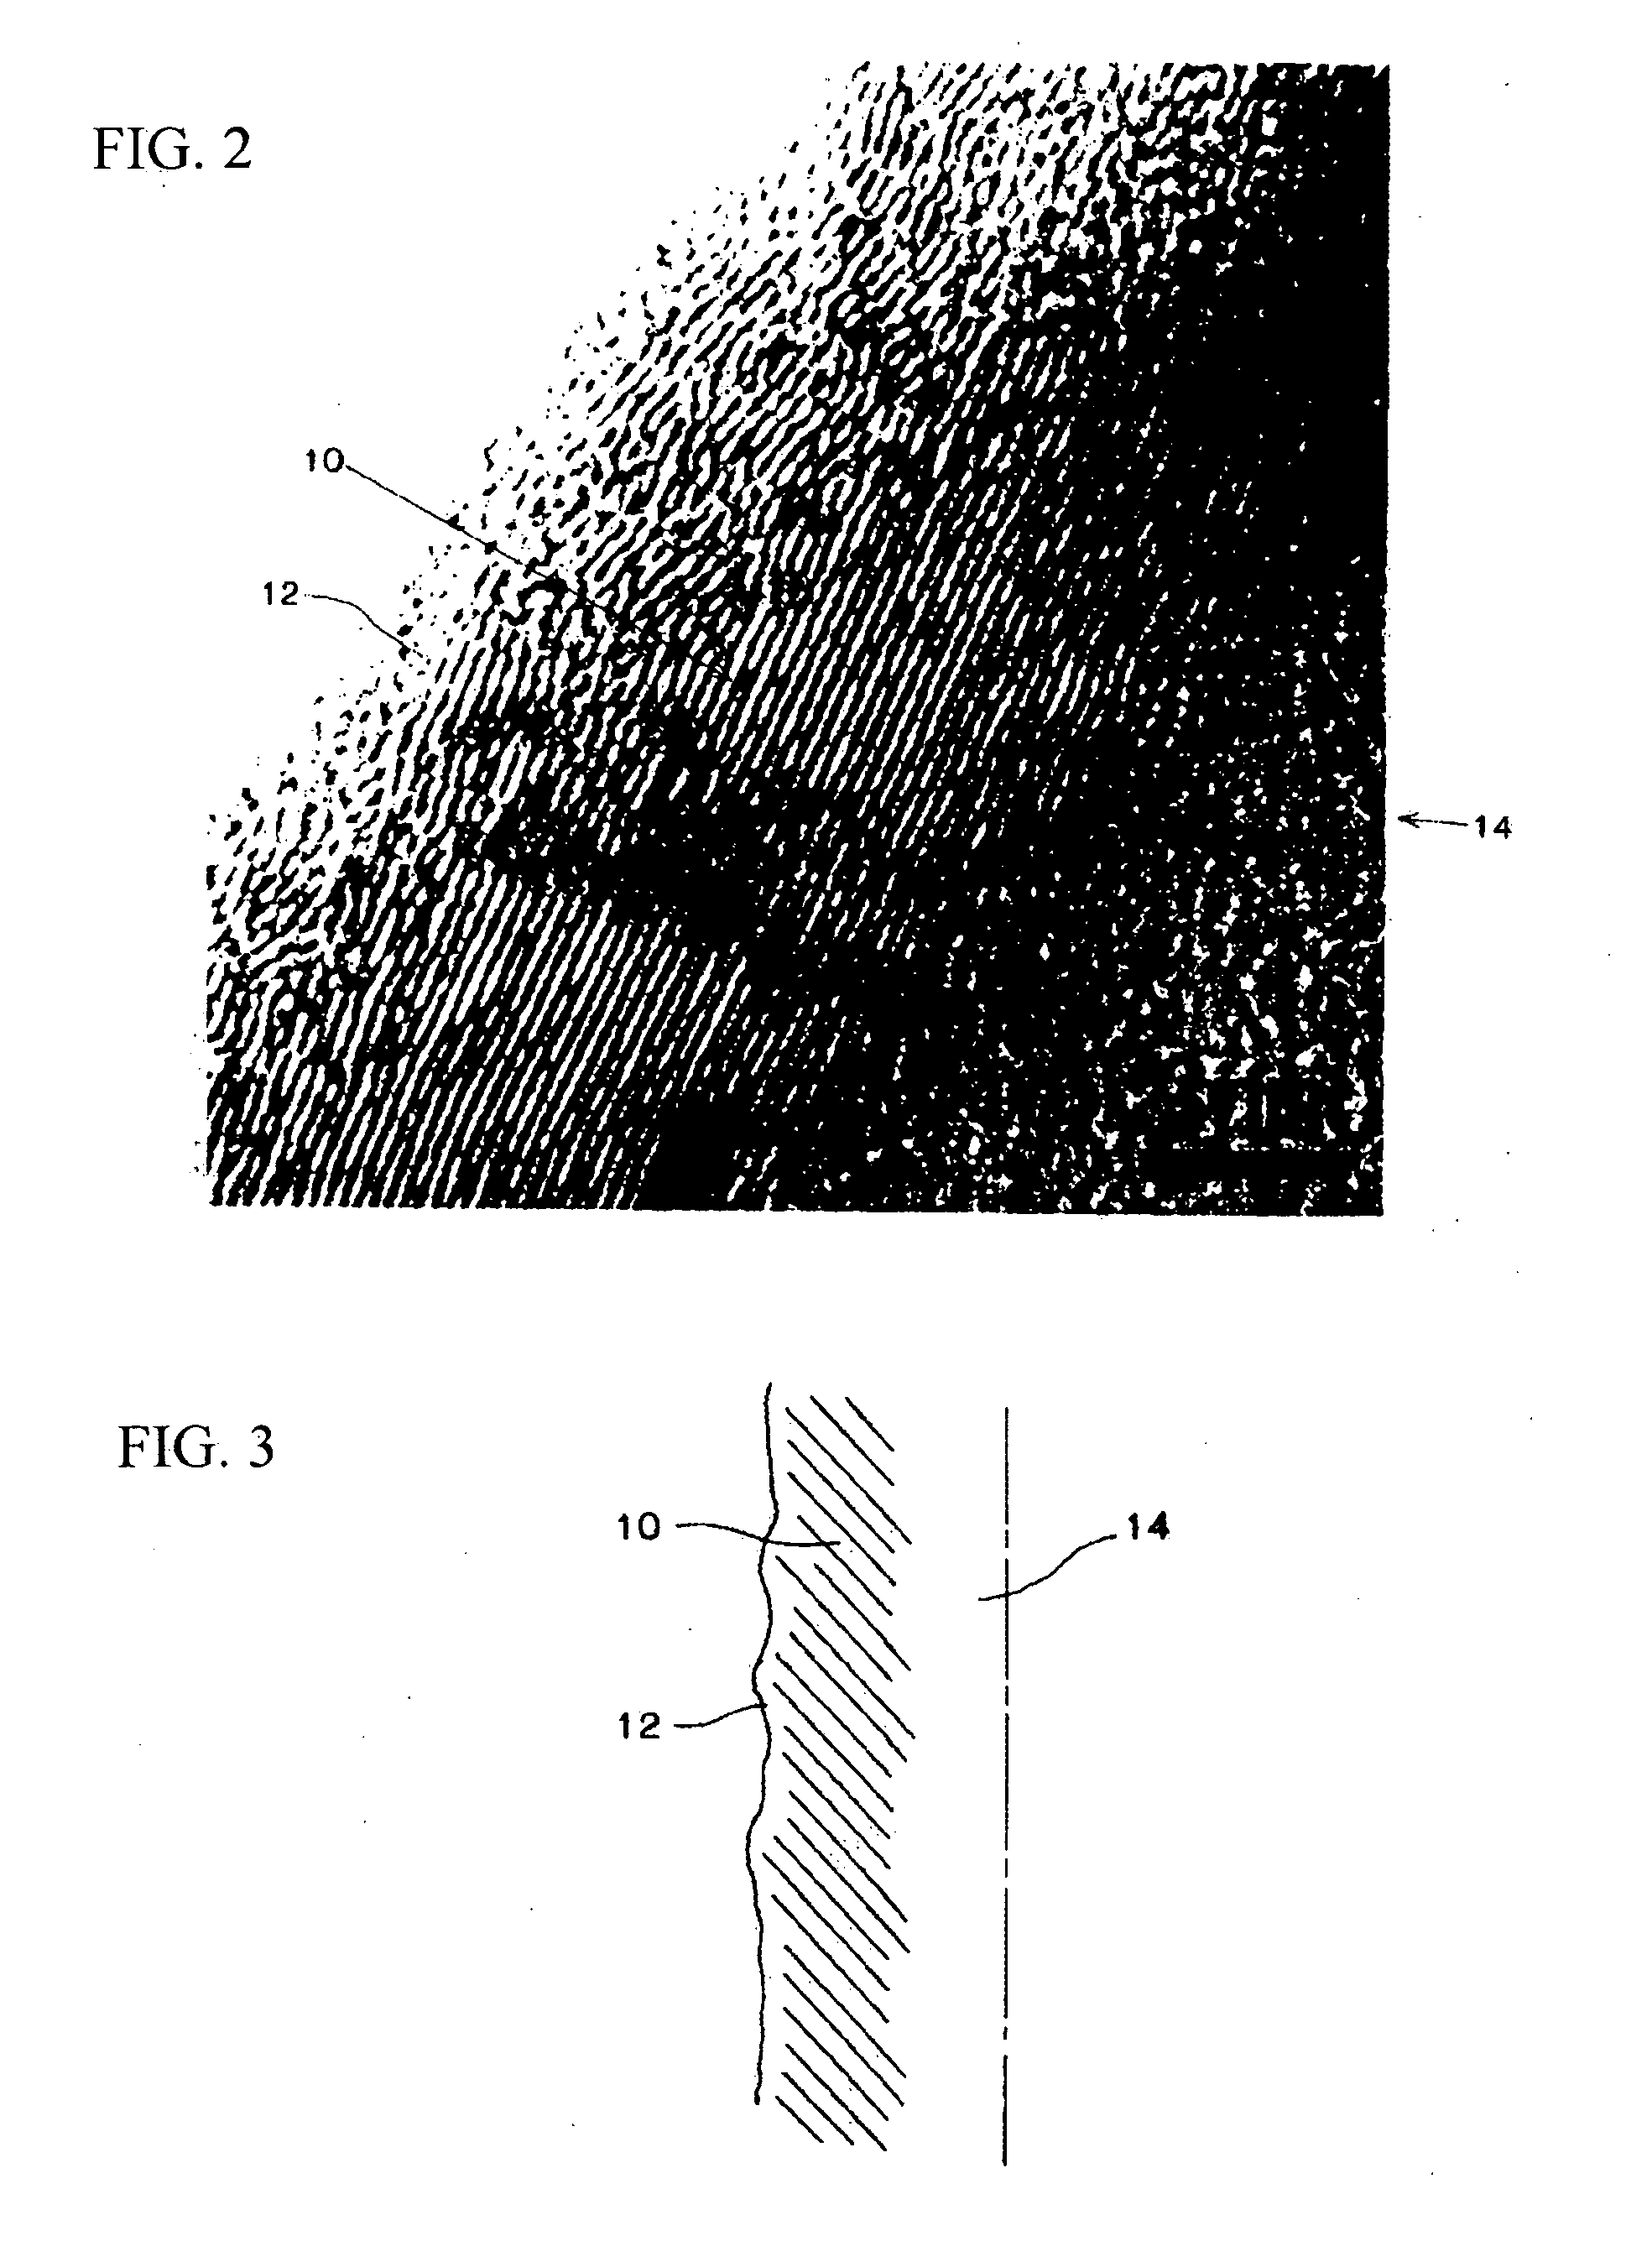 Cell culture carrier and jig for cell culture